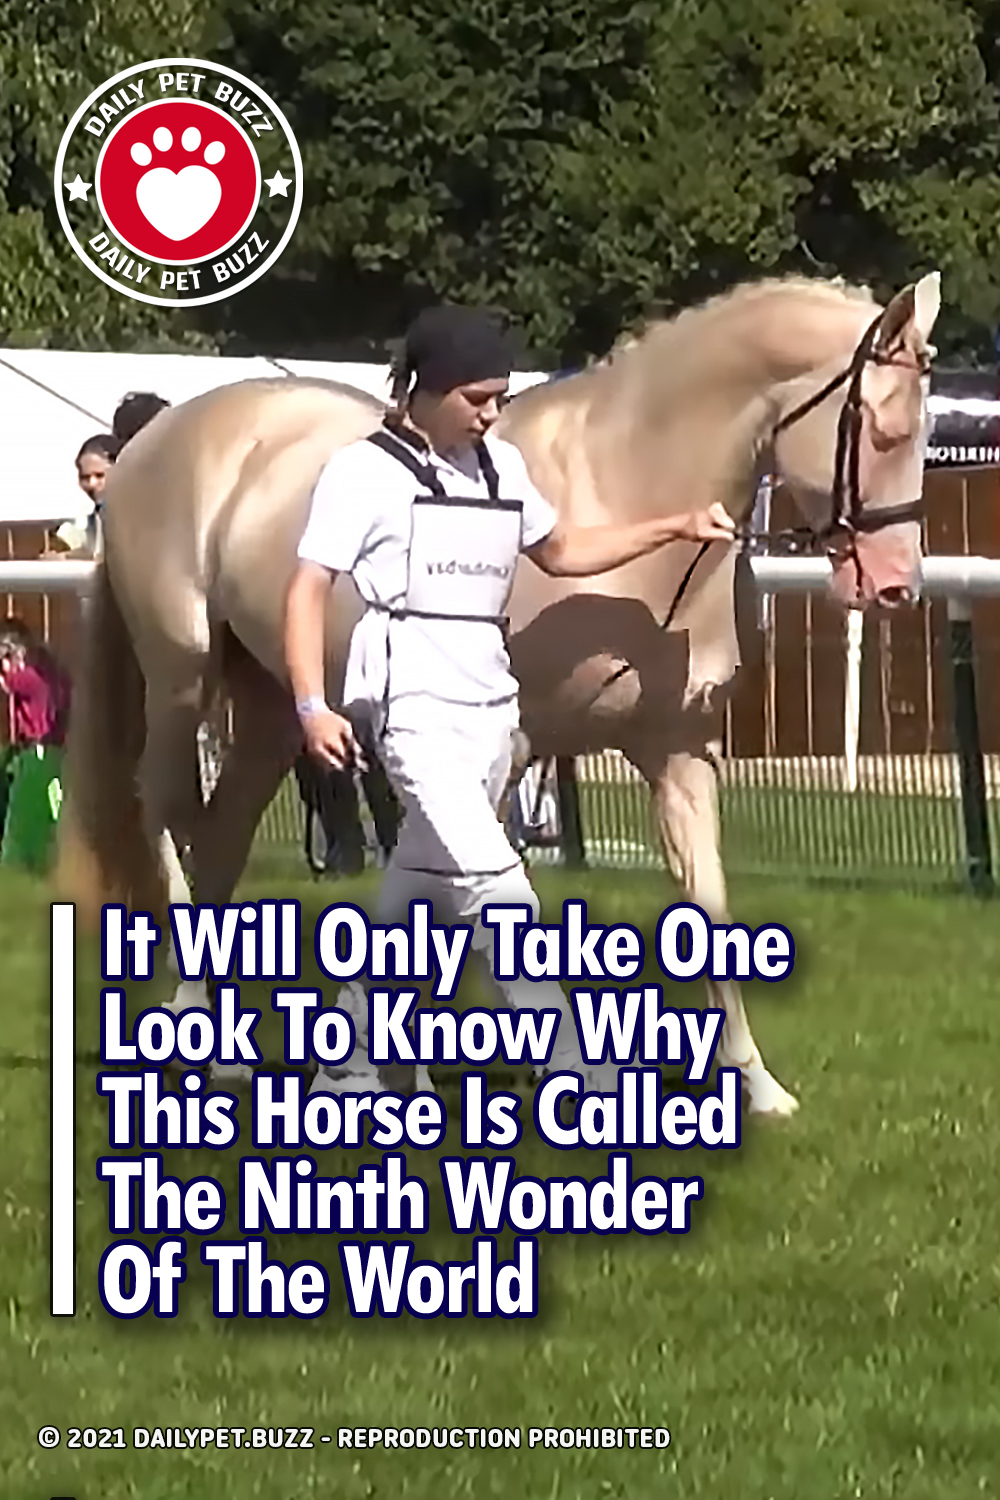 It Will Only Take One Look To Know Why This Horse Is Called The Ninth Wonder Of The World